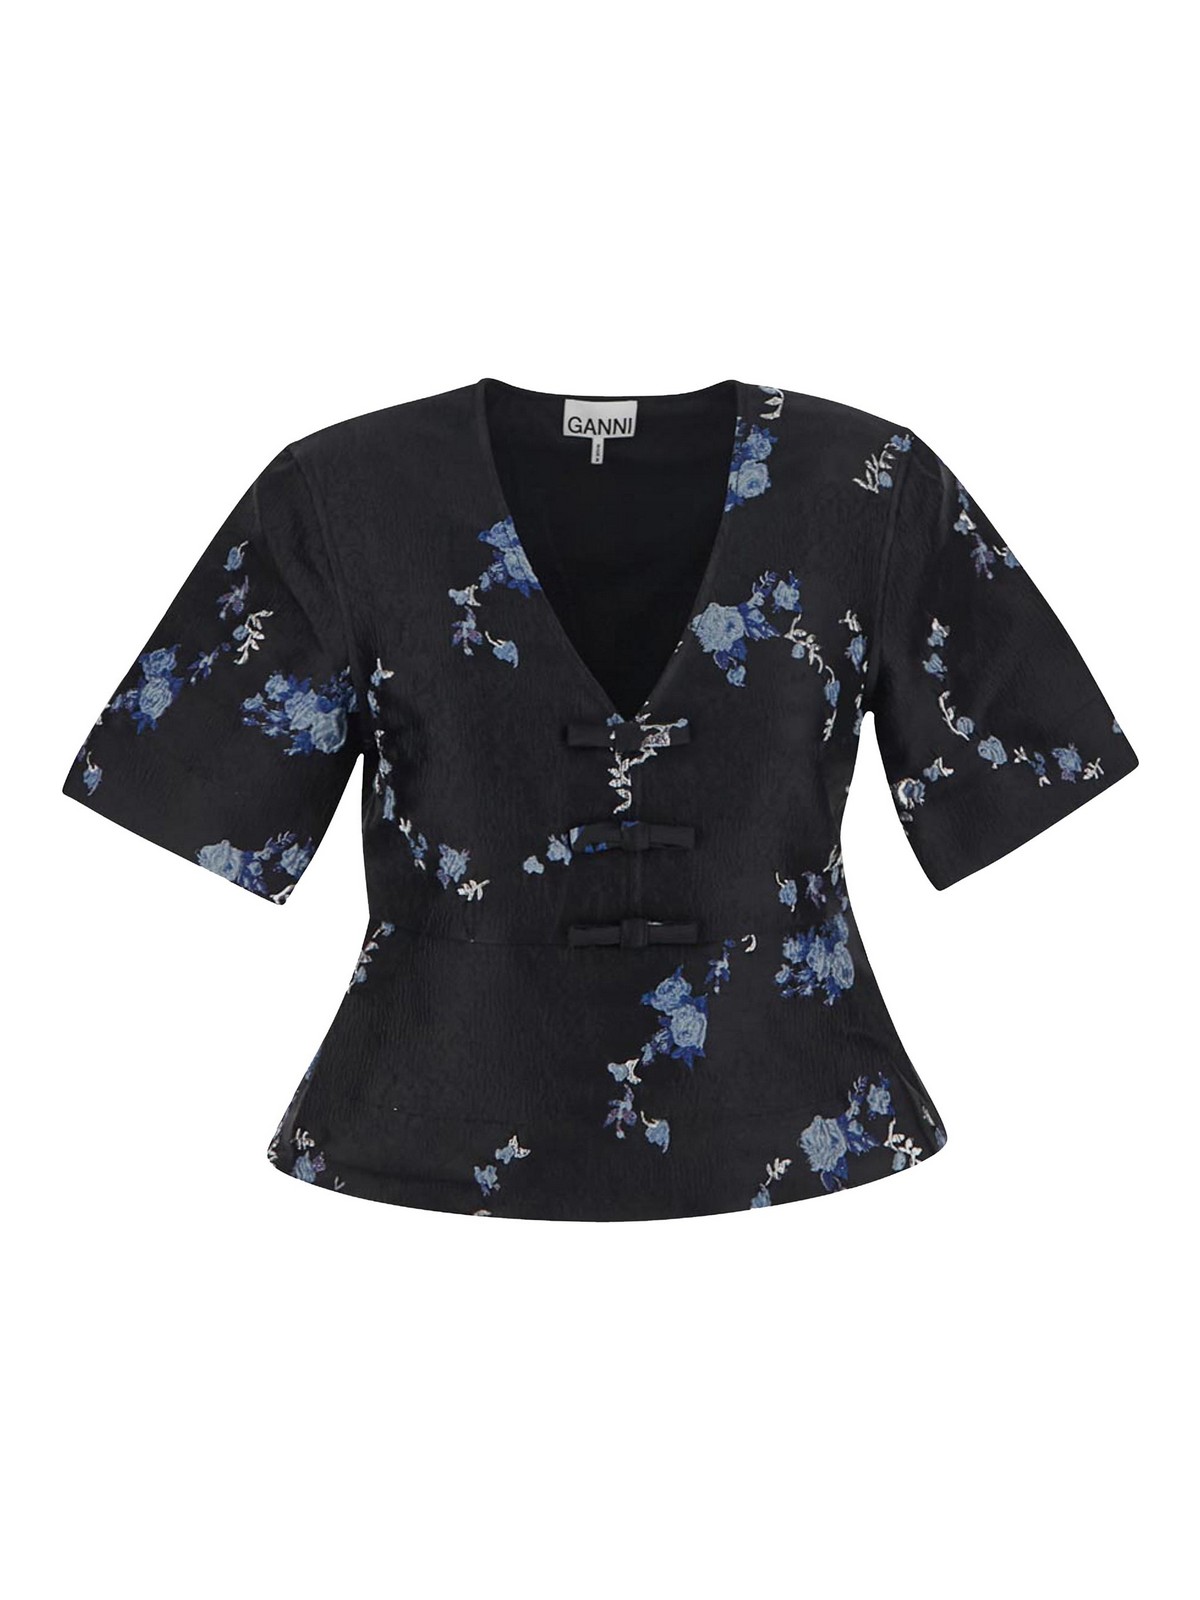 Shop Ganni Top In Black With Blue And Floral